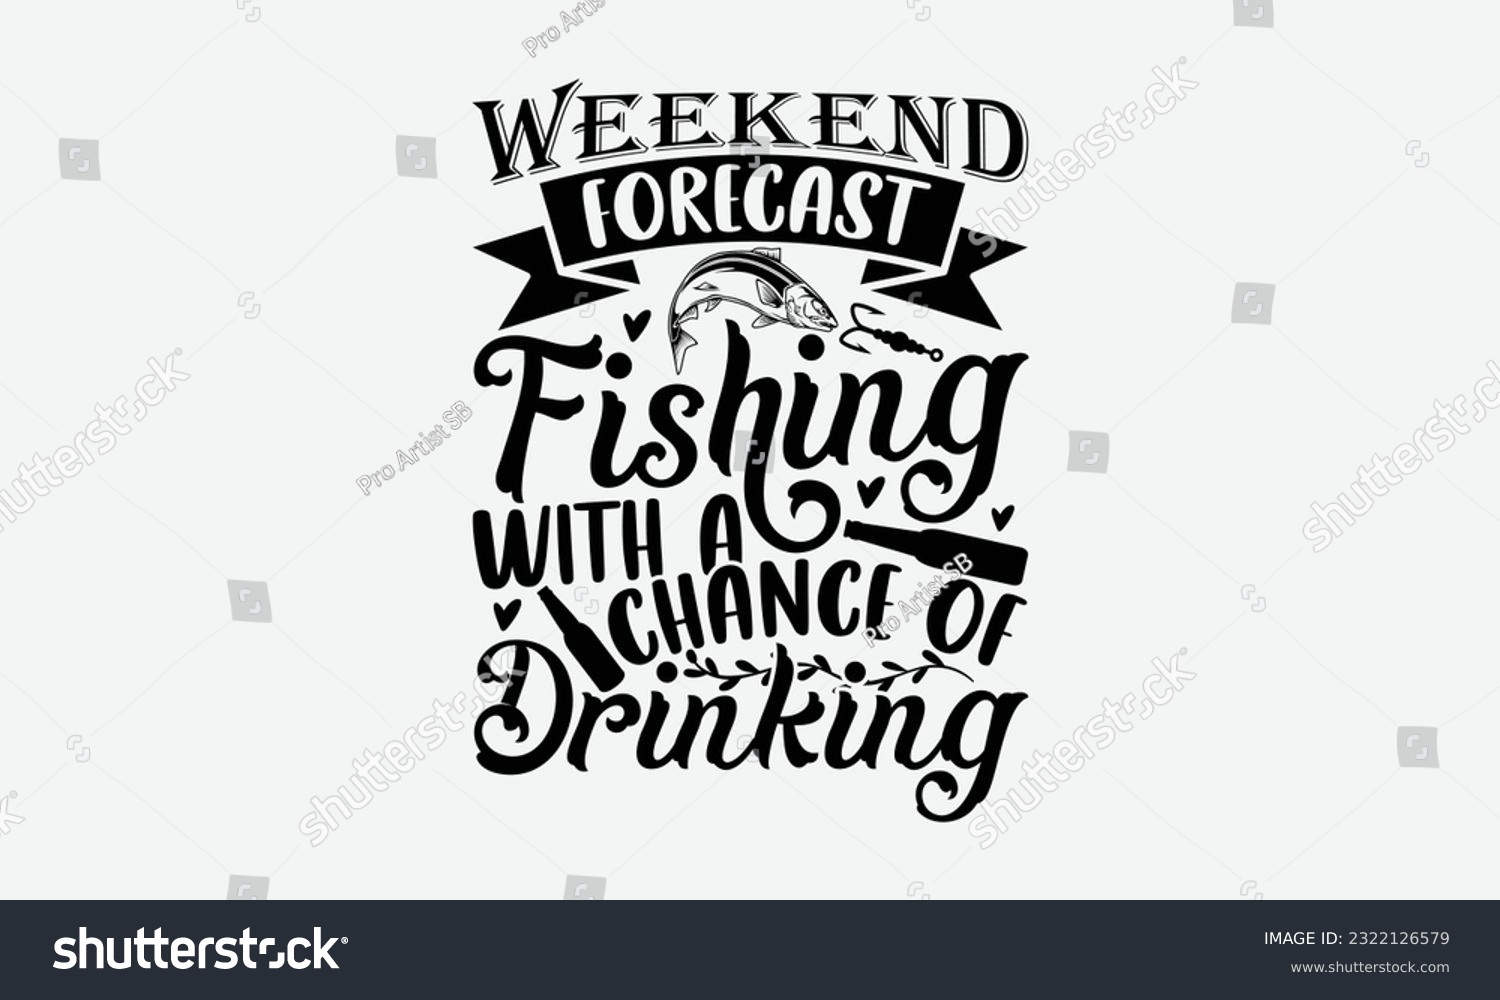 SVG of Weekend Forecast Fishing With A Chance Of Drinking - Fishing SVG Design, Fisherman Quotes, Hand Written Vector T-Shirt Design, For Prints on Mugs and Bags, Posters. svg